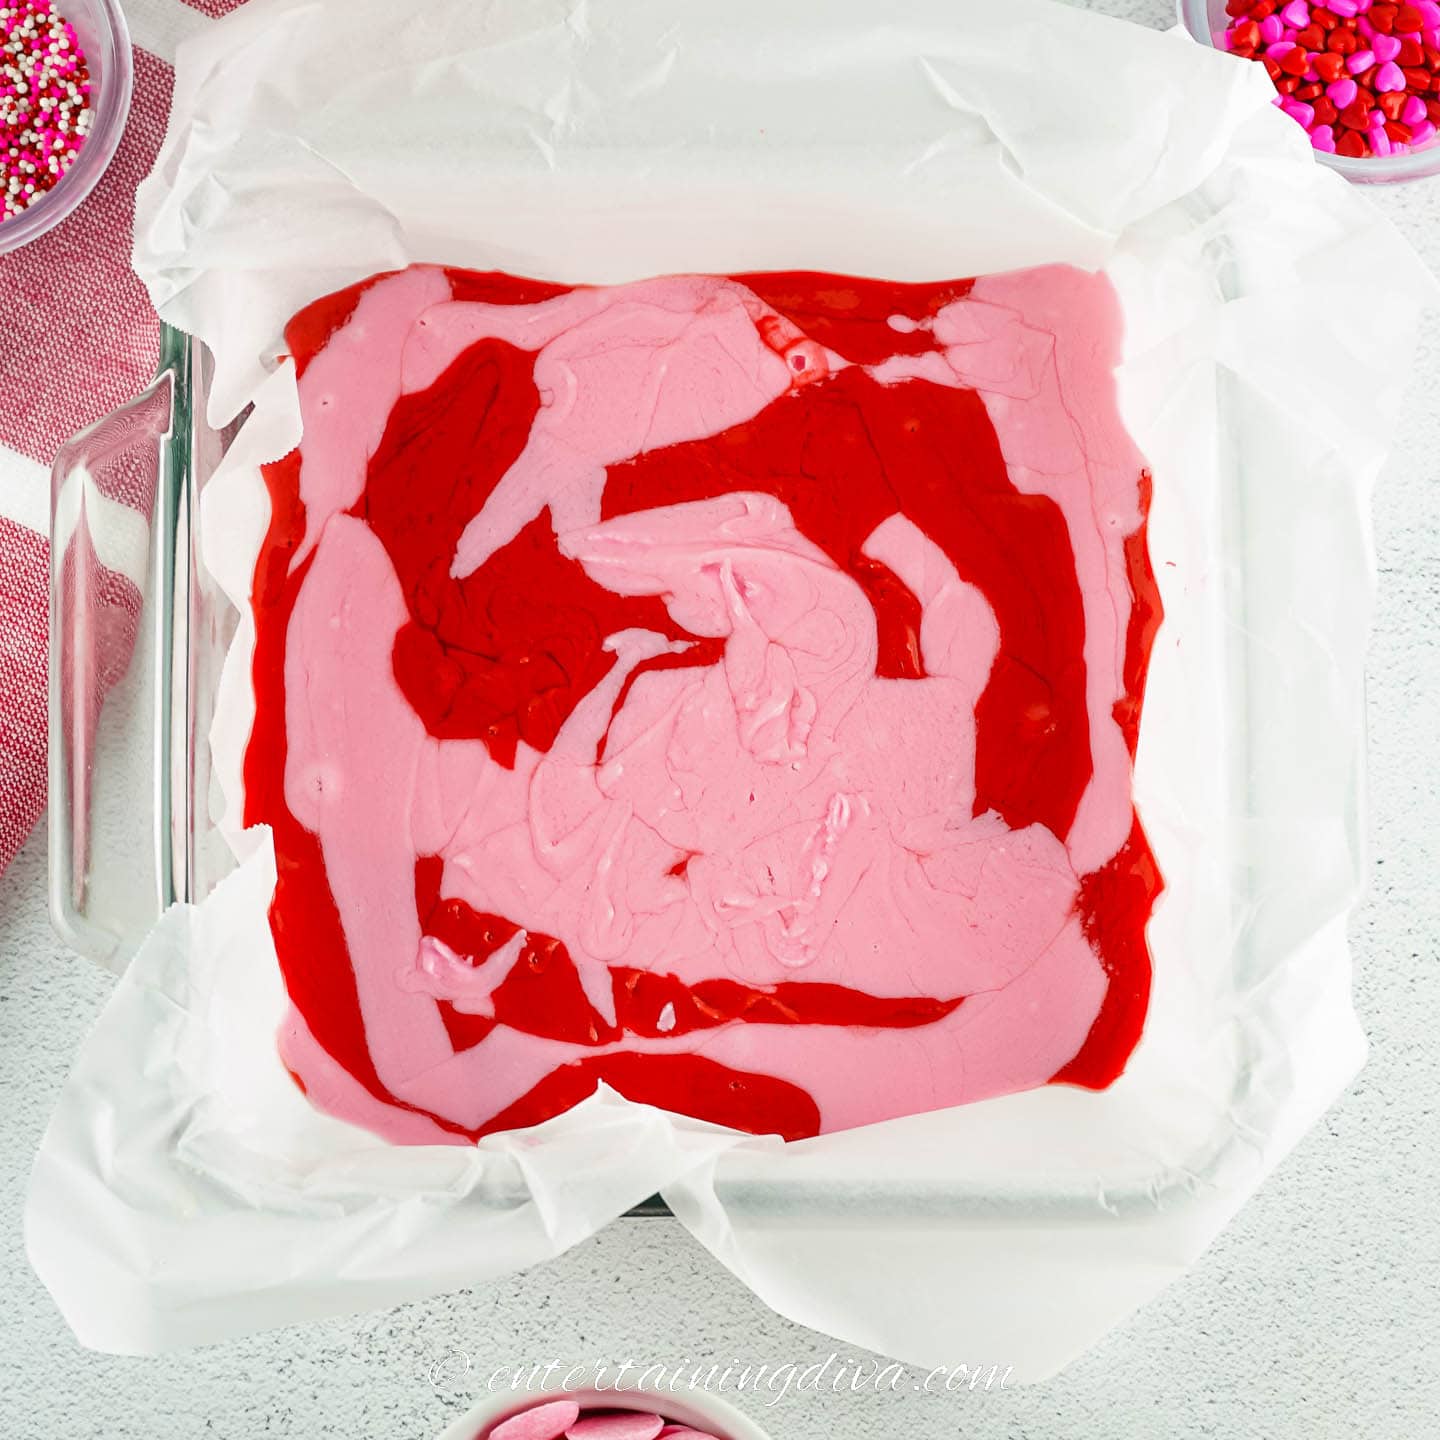 Red and pink strawberry swirl fudge in the pan before chilling